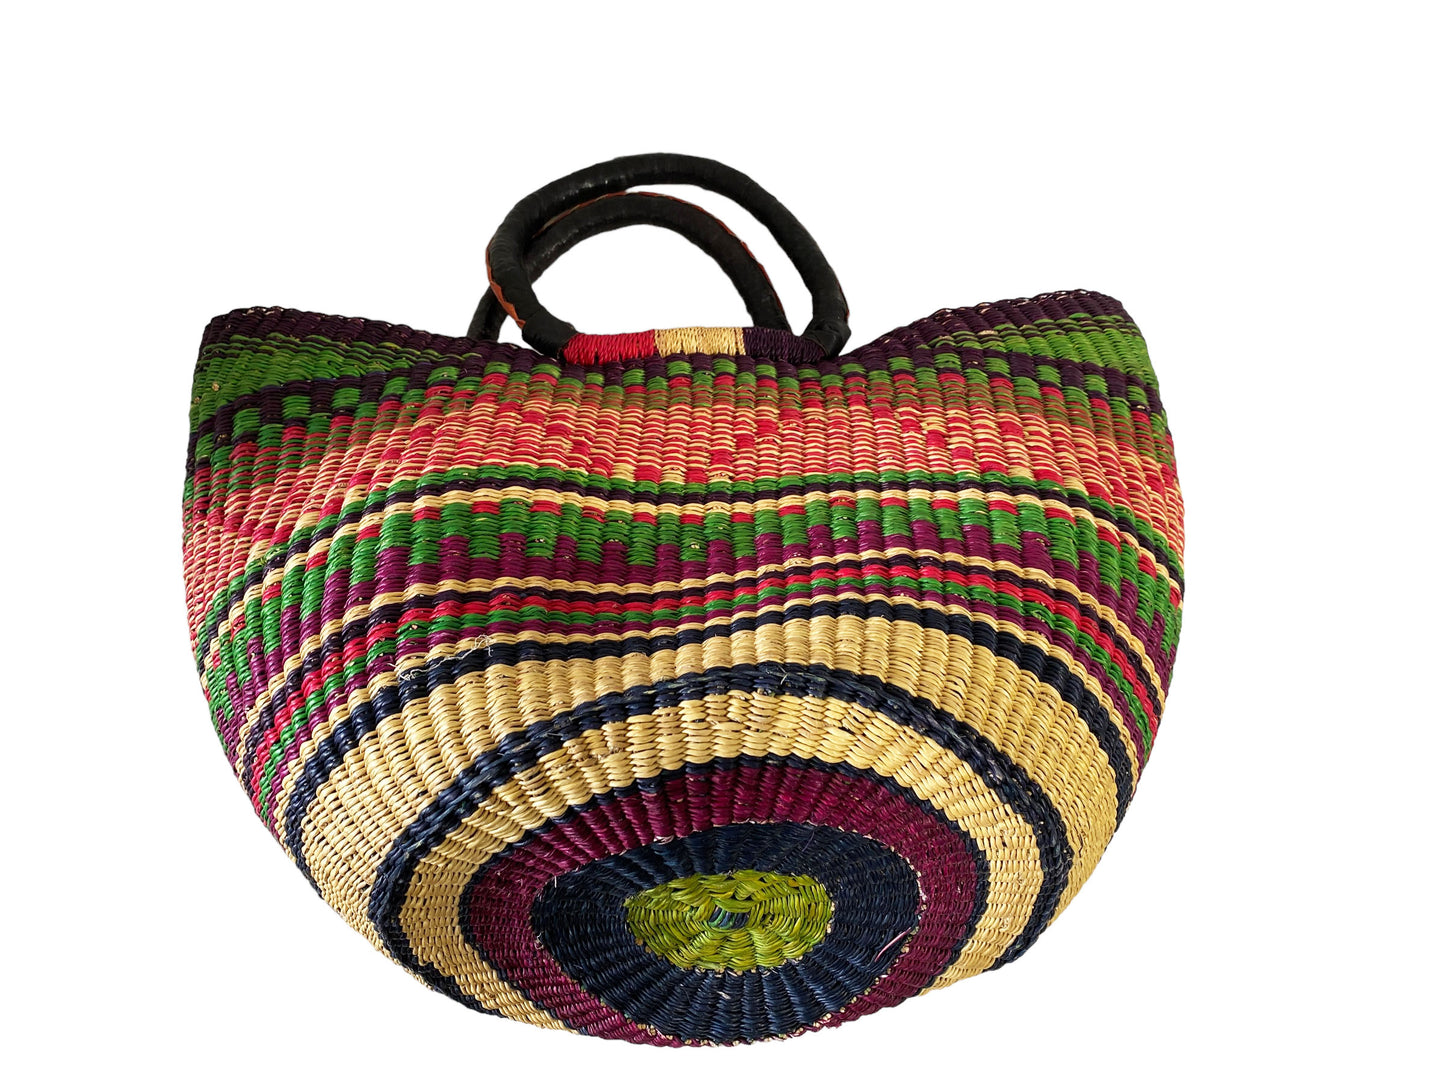 #5384 Large Colorful Saint -Tropez Style African Basket 18" H by 20" W